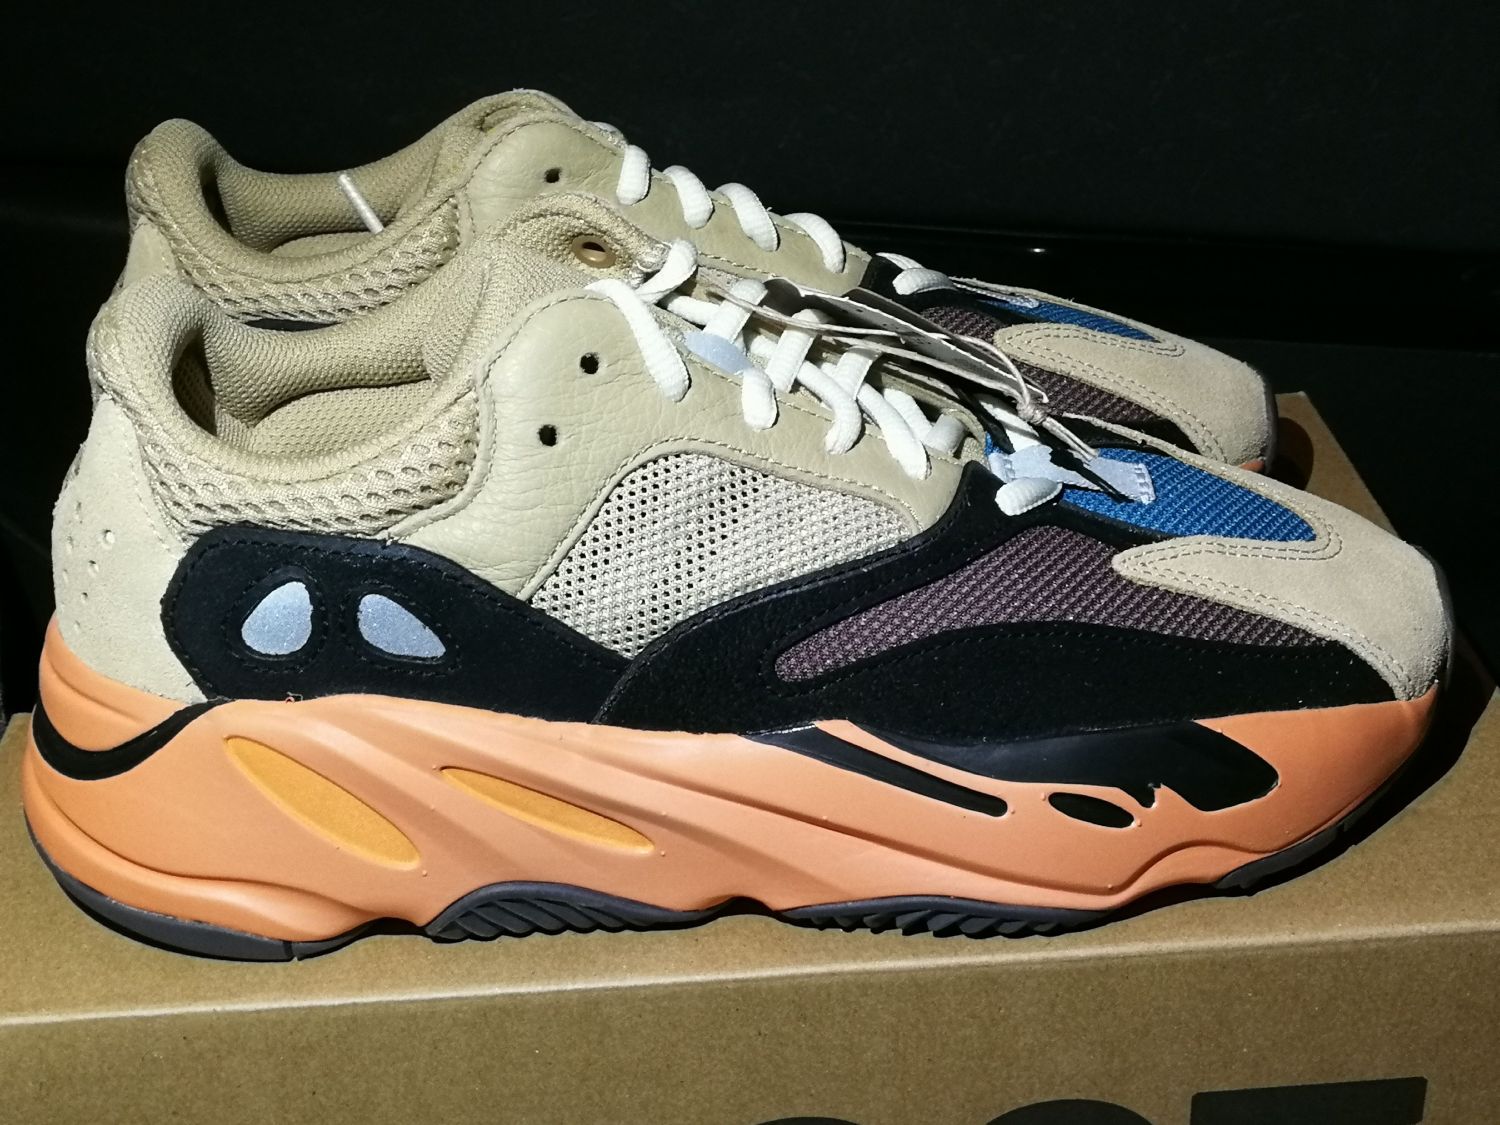 Adidas Yeezy Boost 700 Enflame Amber | AfterMarket